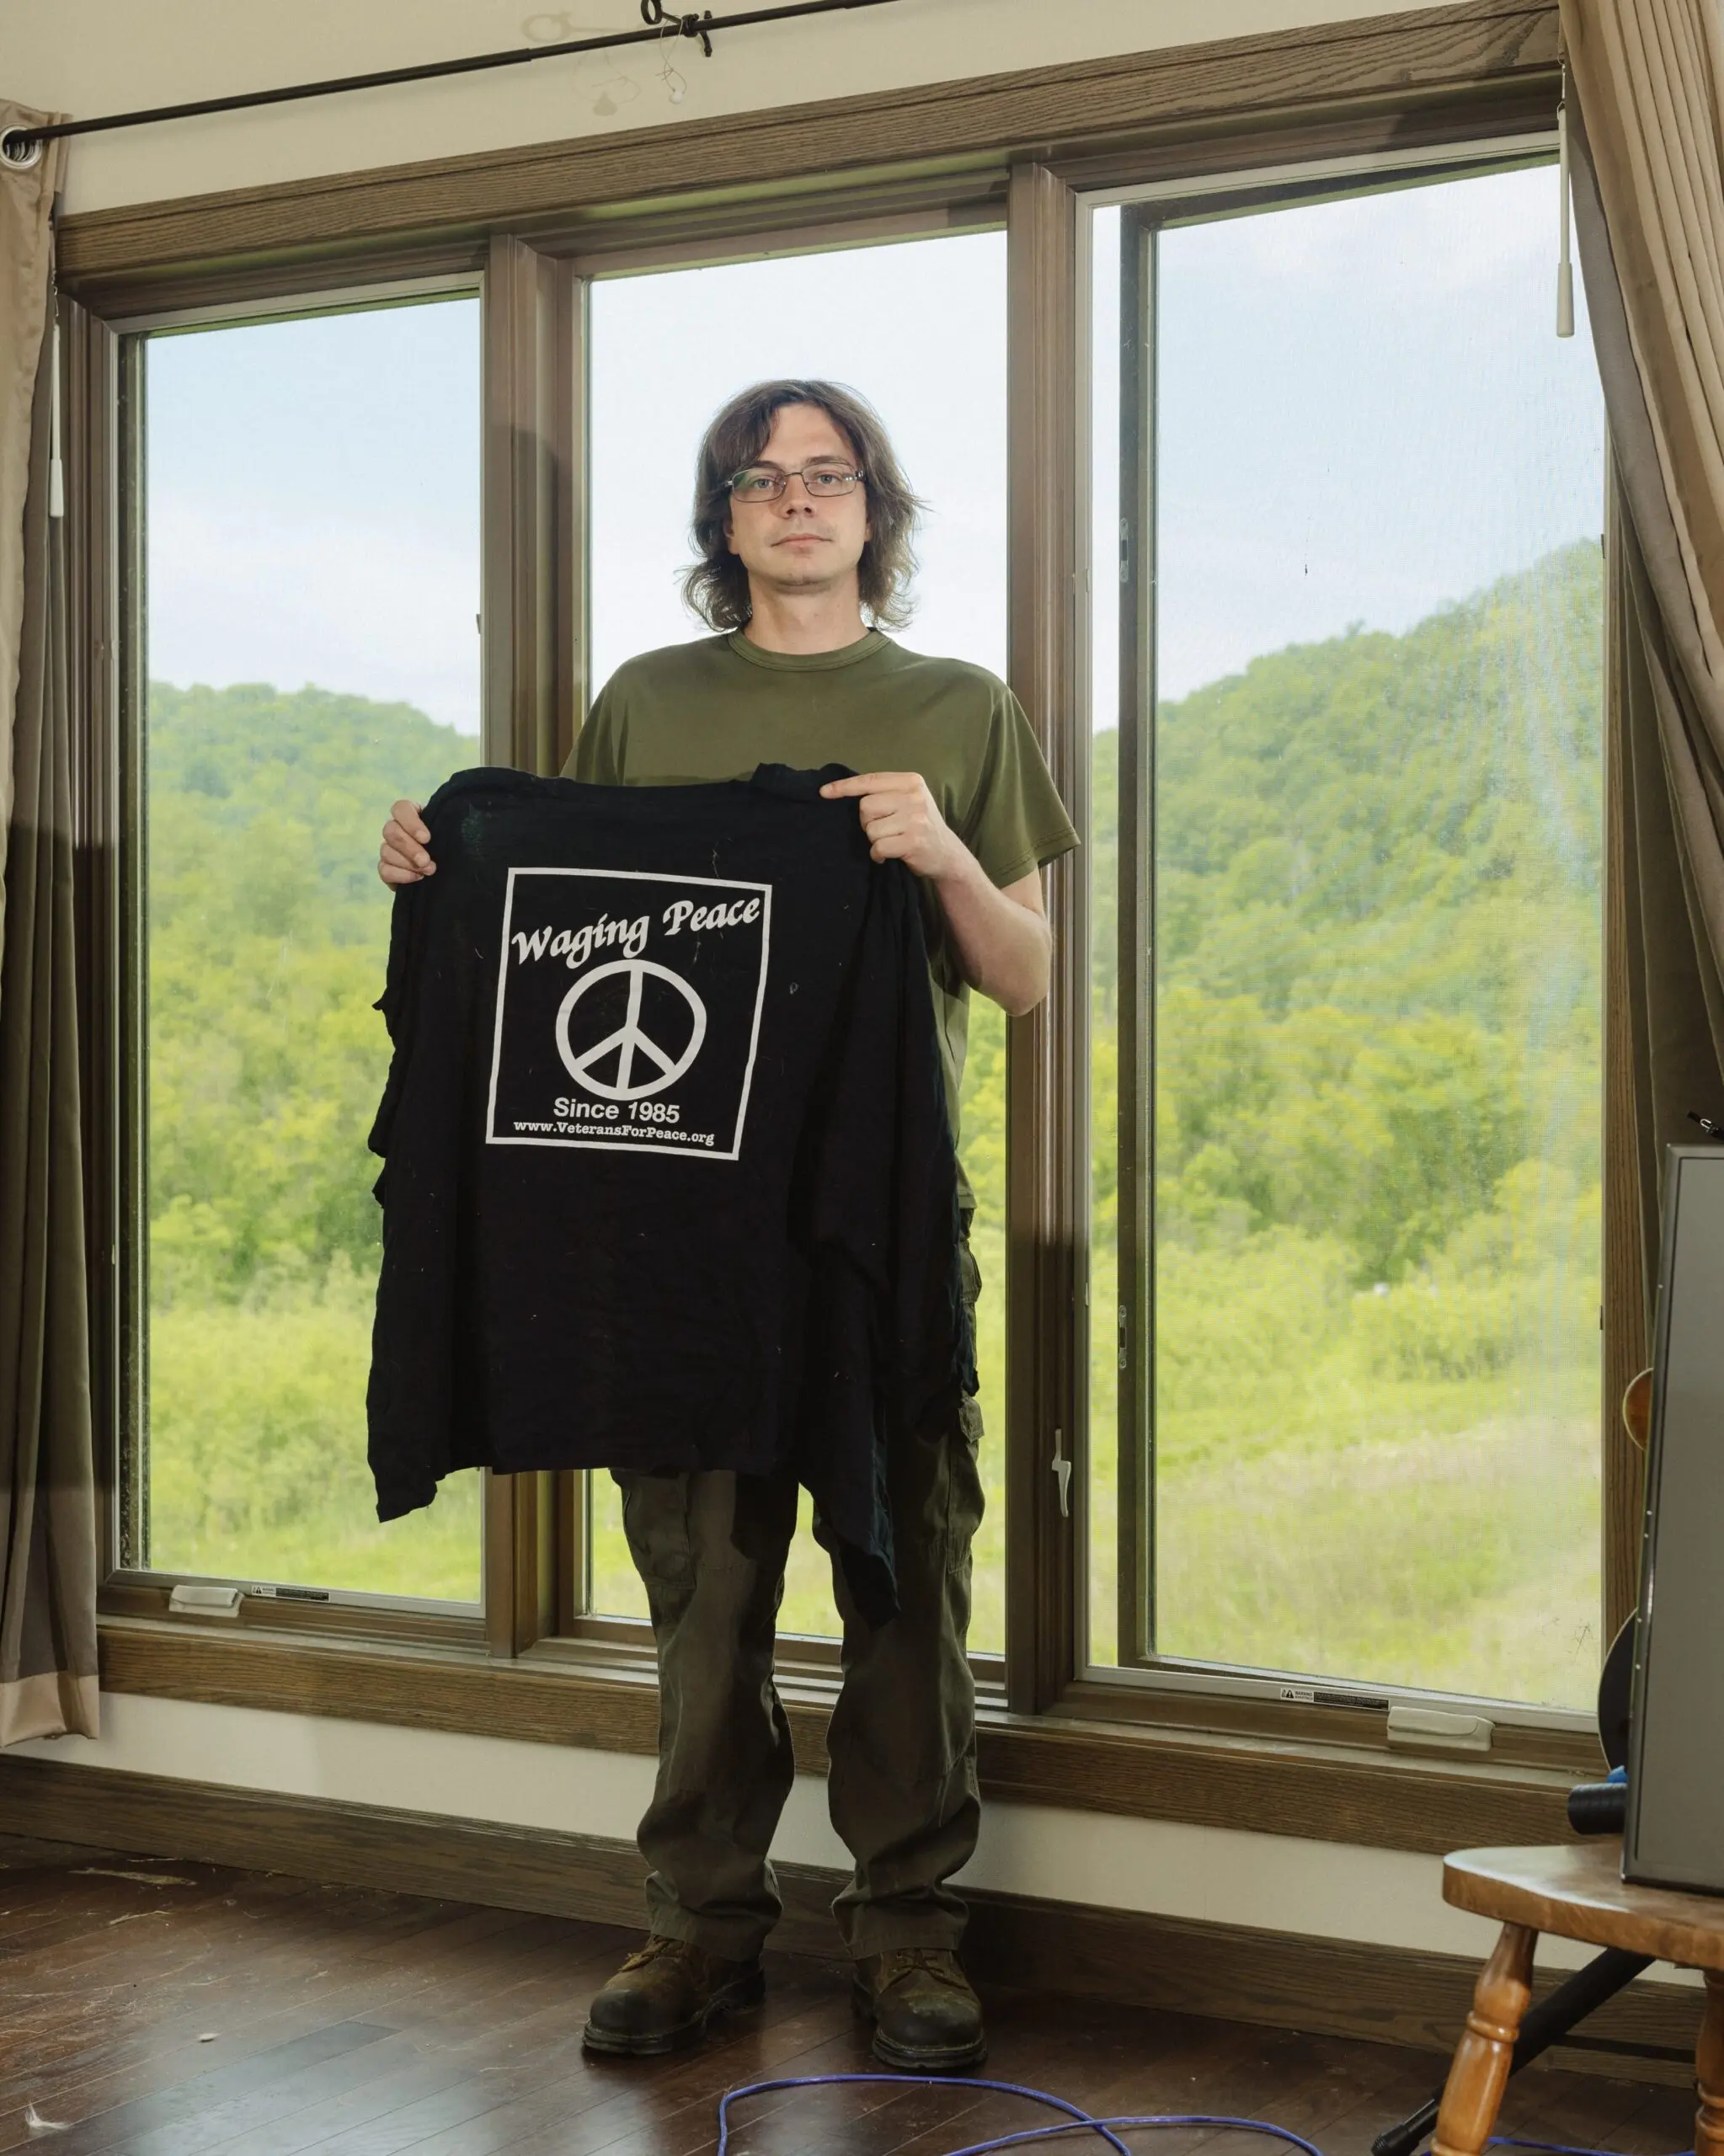 Author 1 displays the “Veterans for Peace” shirt he was wearing when police shot him in the head with a bean-bag round.